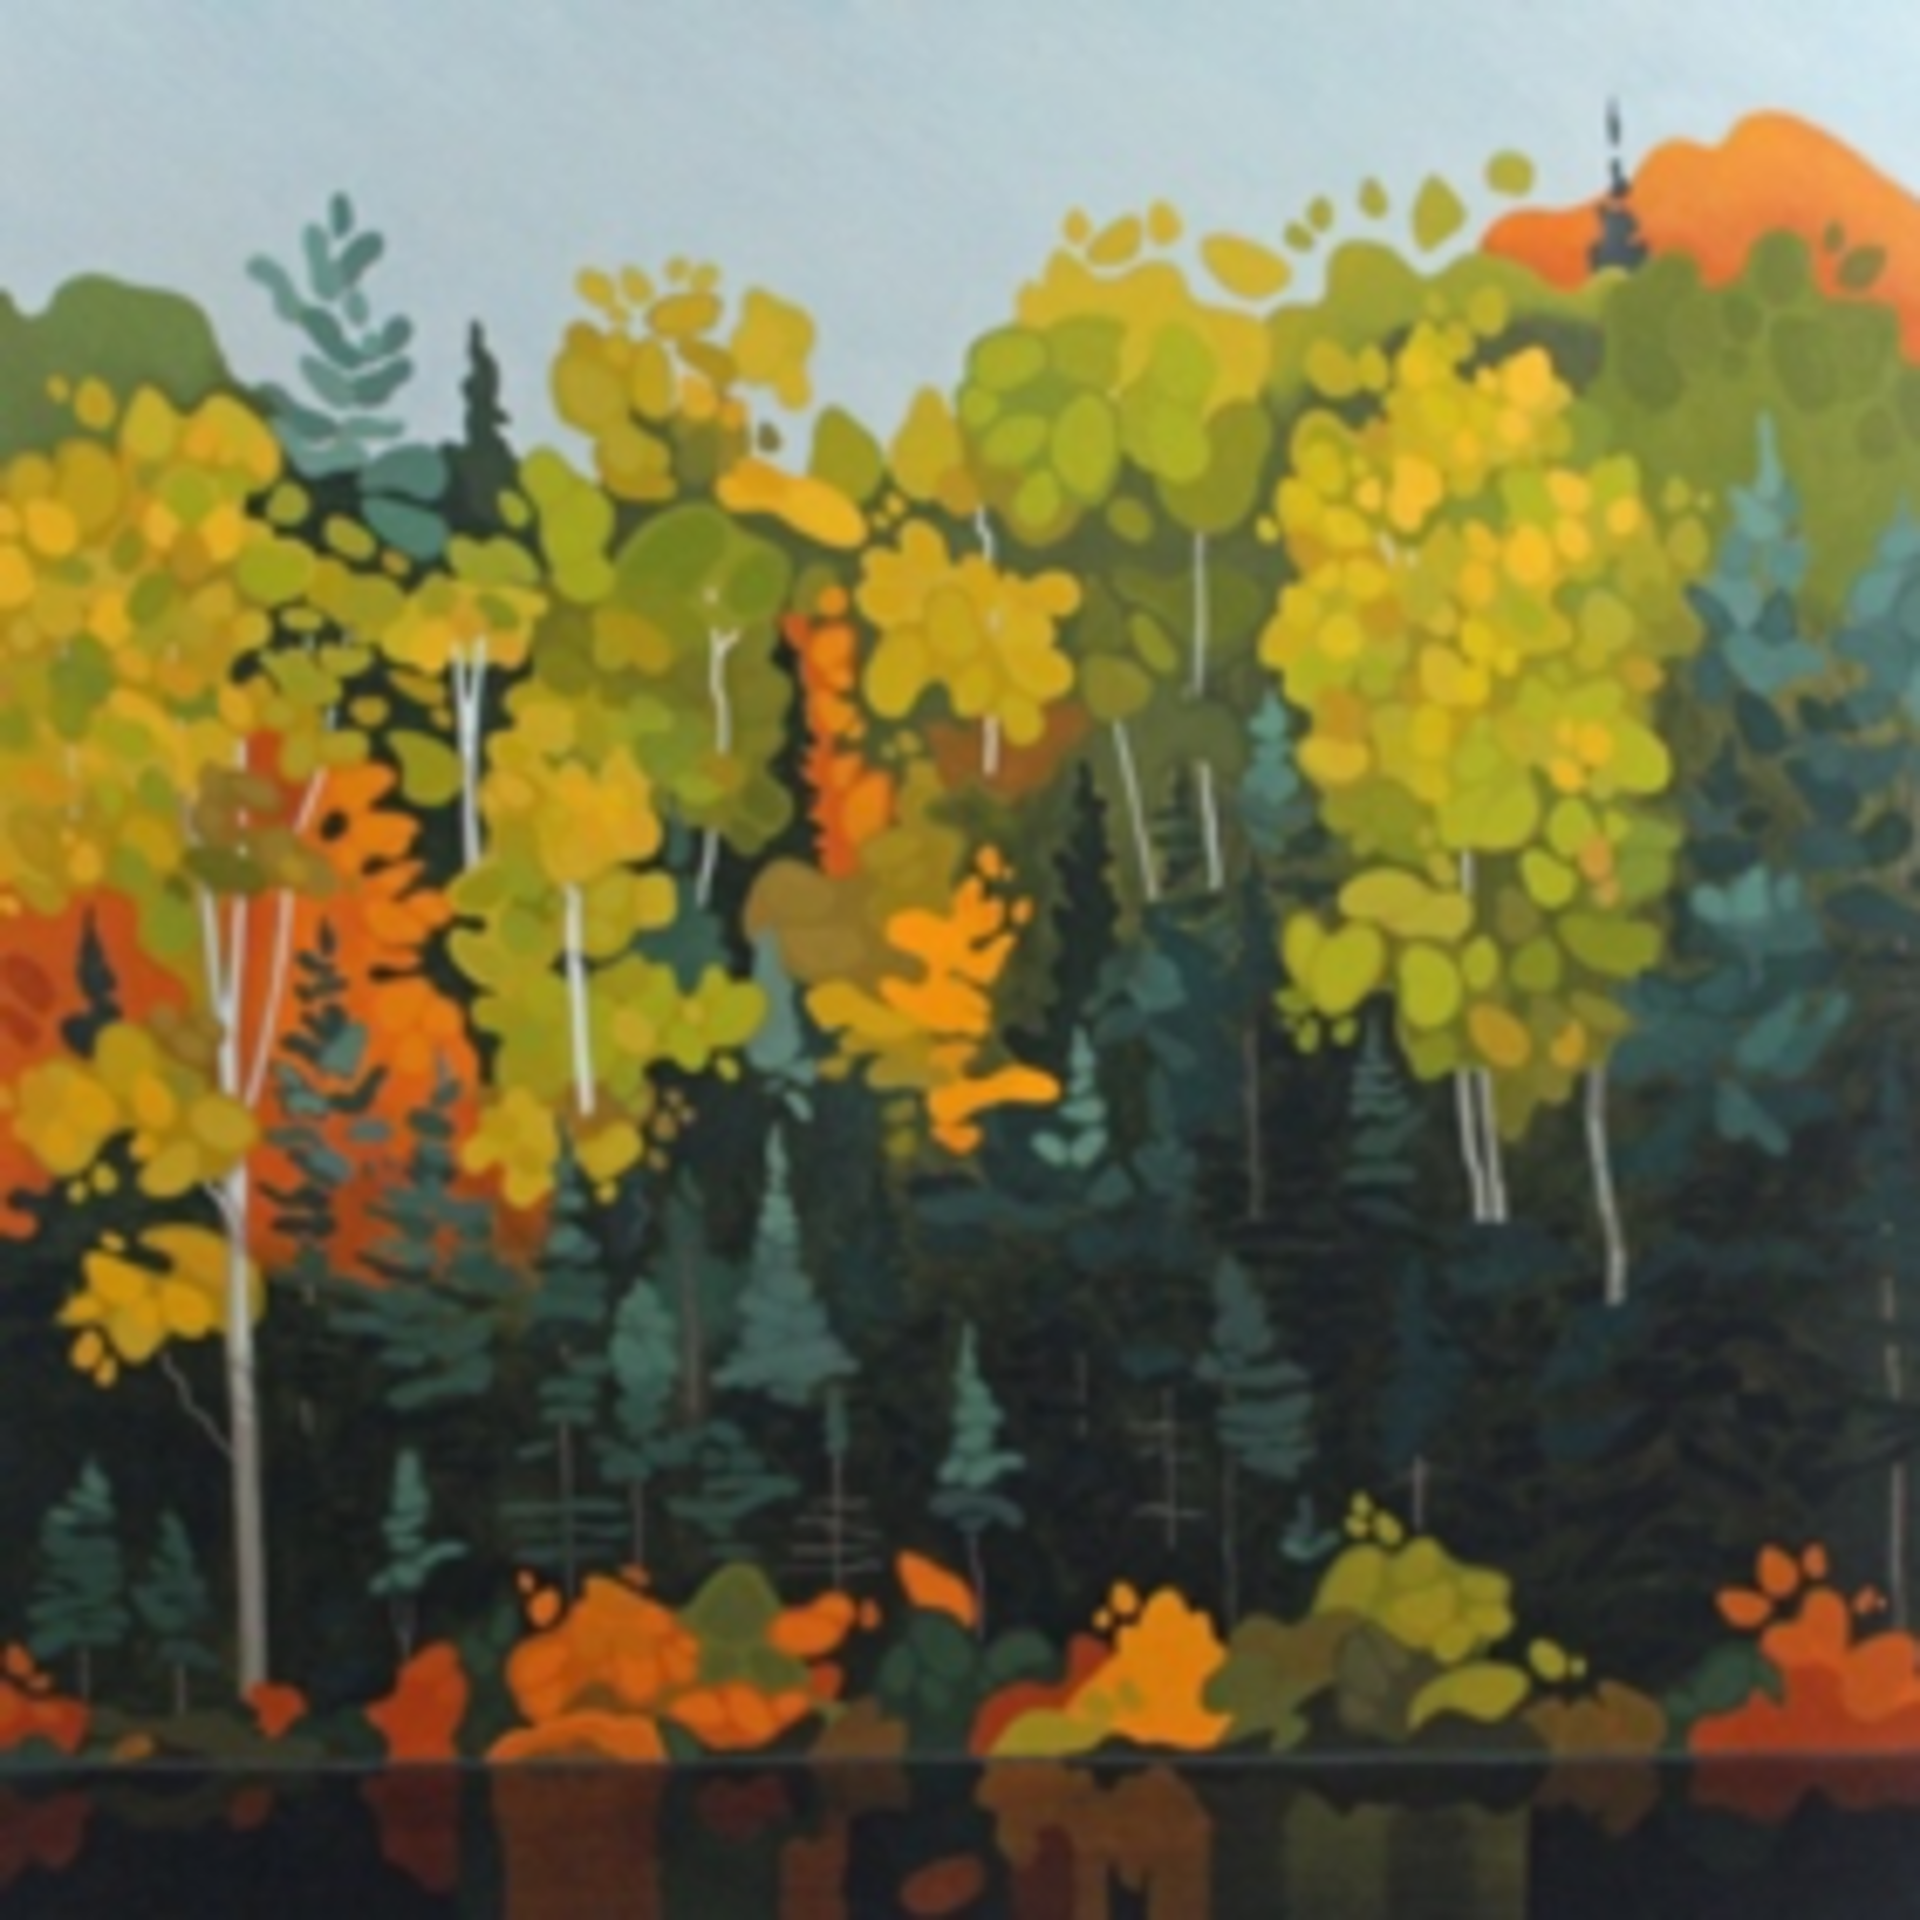 Algonquin Birches and Spruce by Leanne Baird